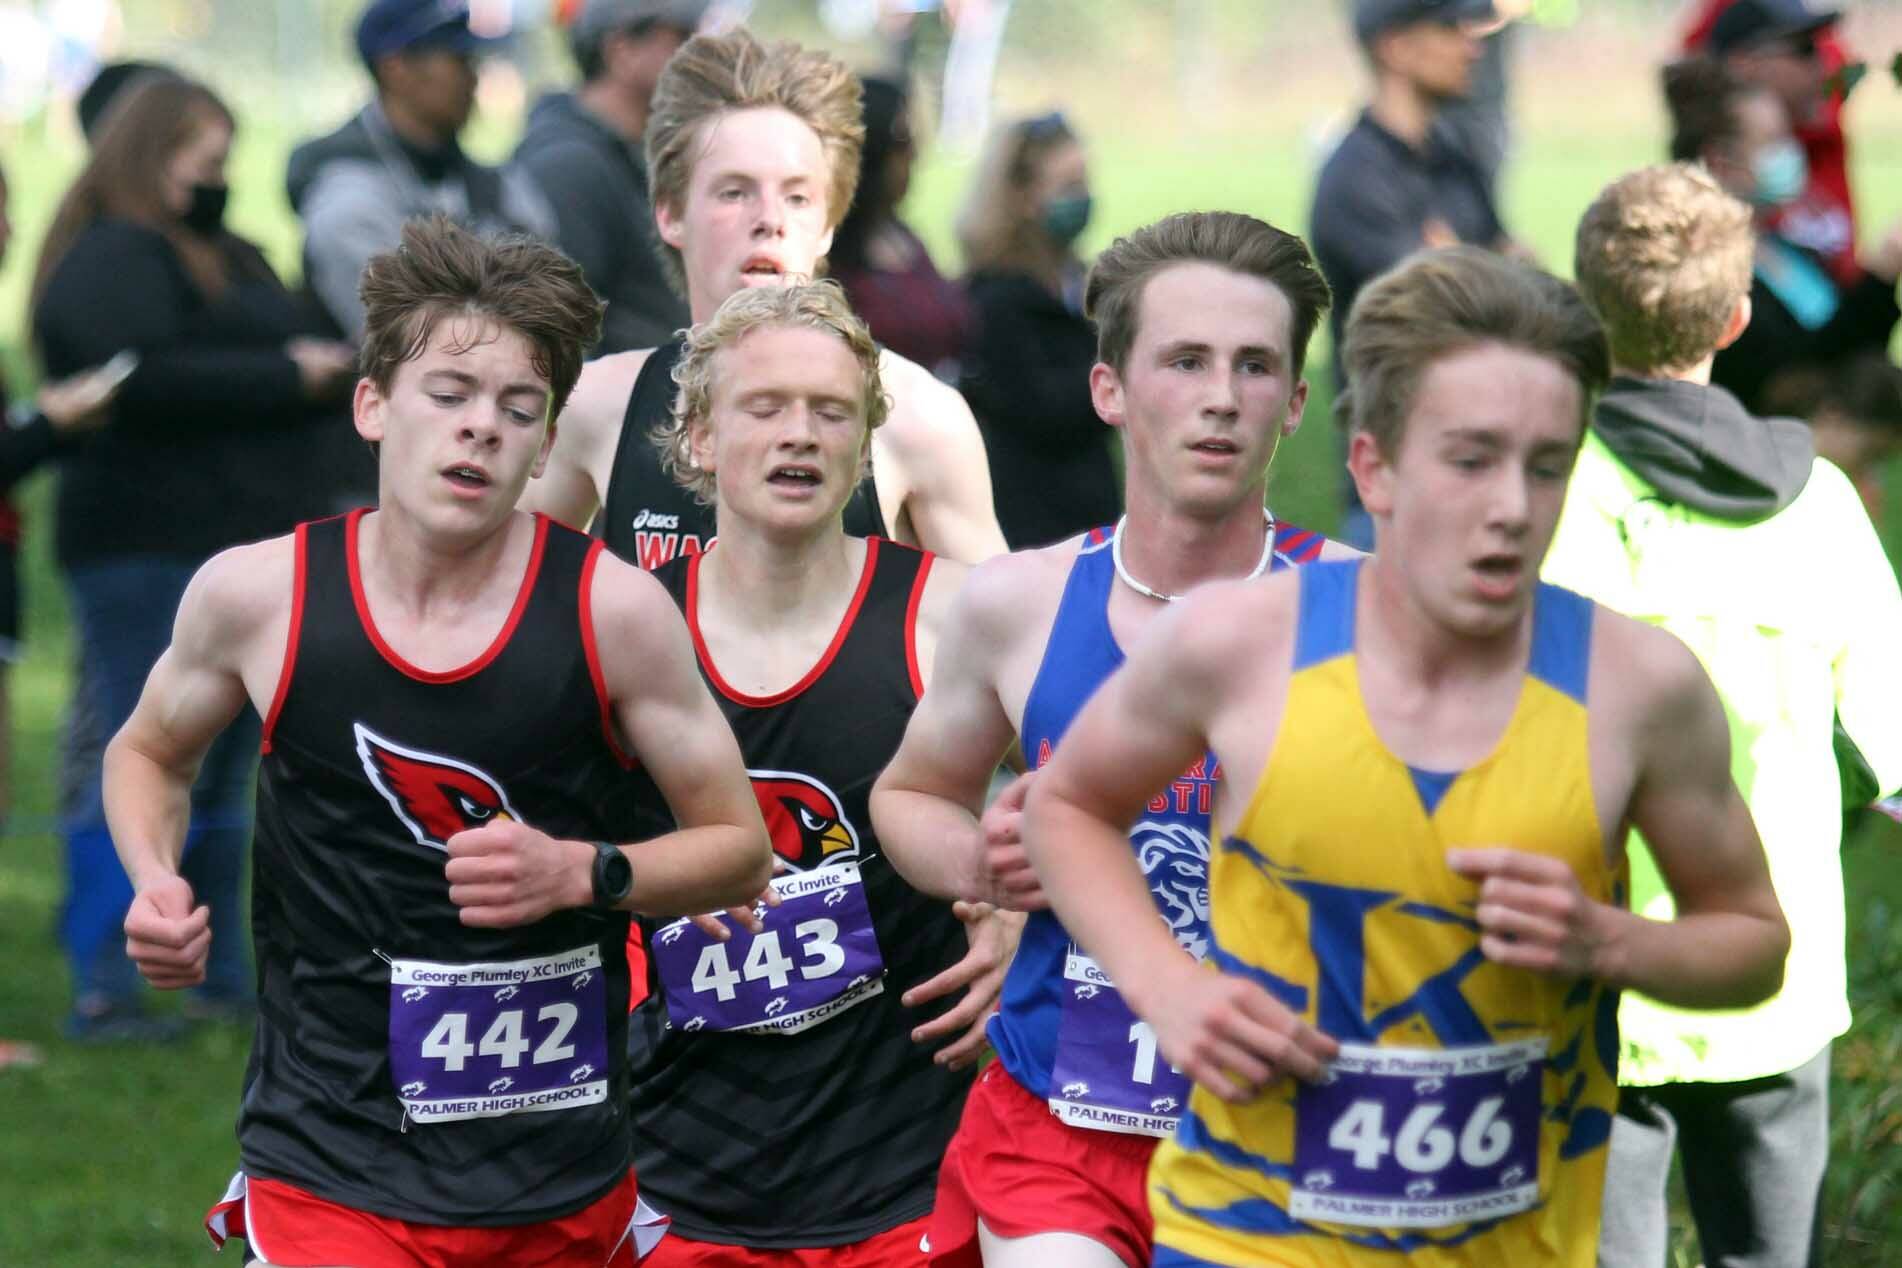 Kenai’s Gregory Fallon and Jack Laker try to gain position during the varsity boys race of the George Plumley Invitational on Saturday, Sept. 11, 2021, at Palmer High School. (Photo by Jeremiah Bartz/Frontiersman)